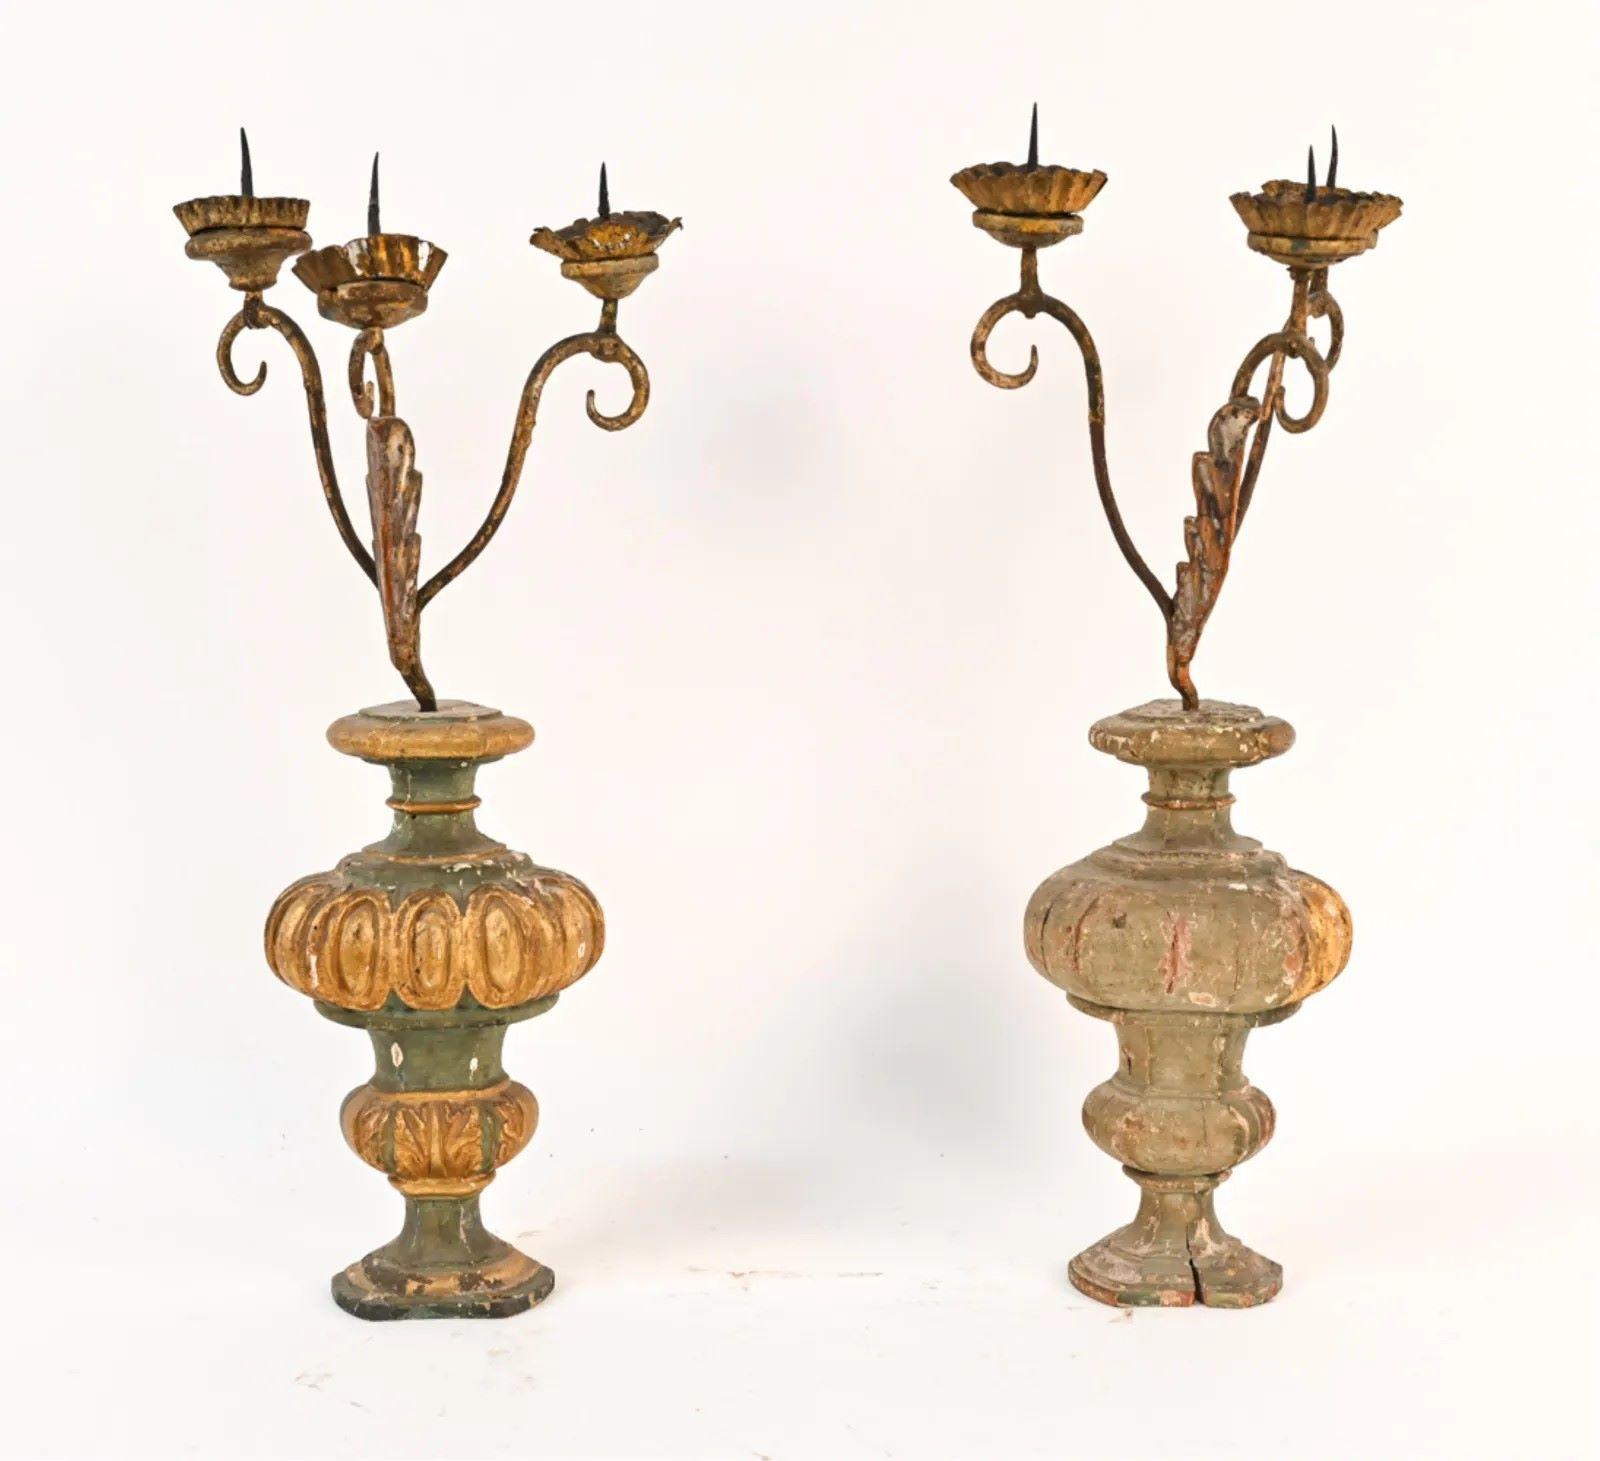 A charming pair of 18th century or earlier altar candle holders, each with 3 tole and wrought iron arms on a gesso and parcel gilt decorated wood urn-form base.